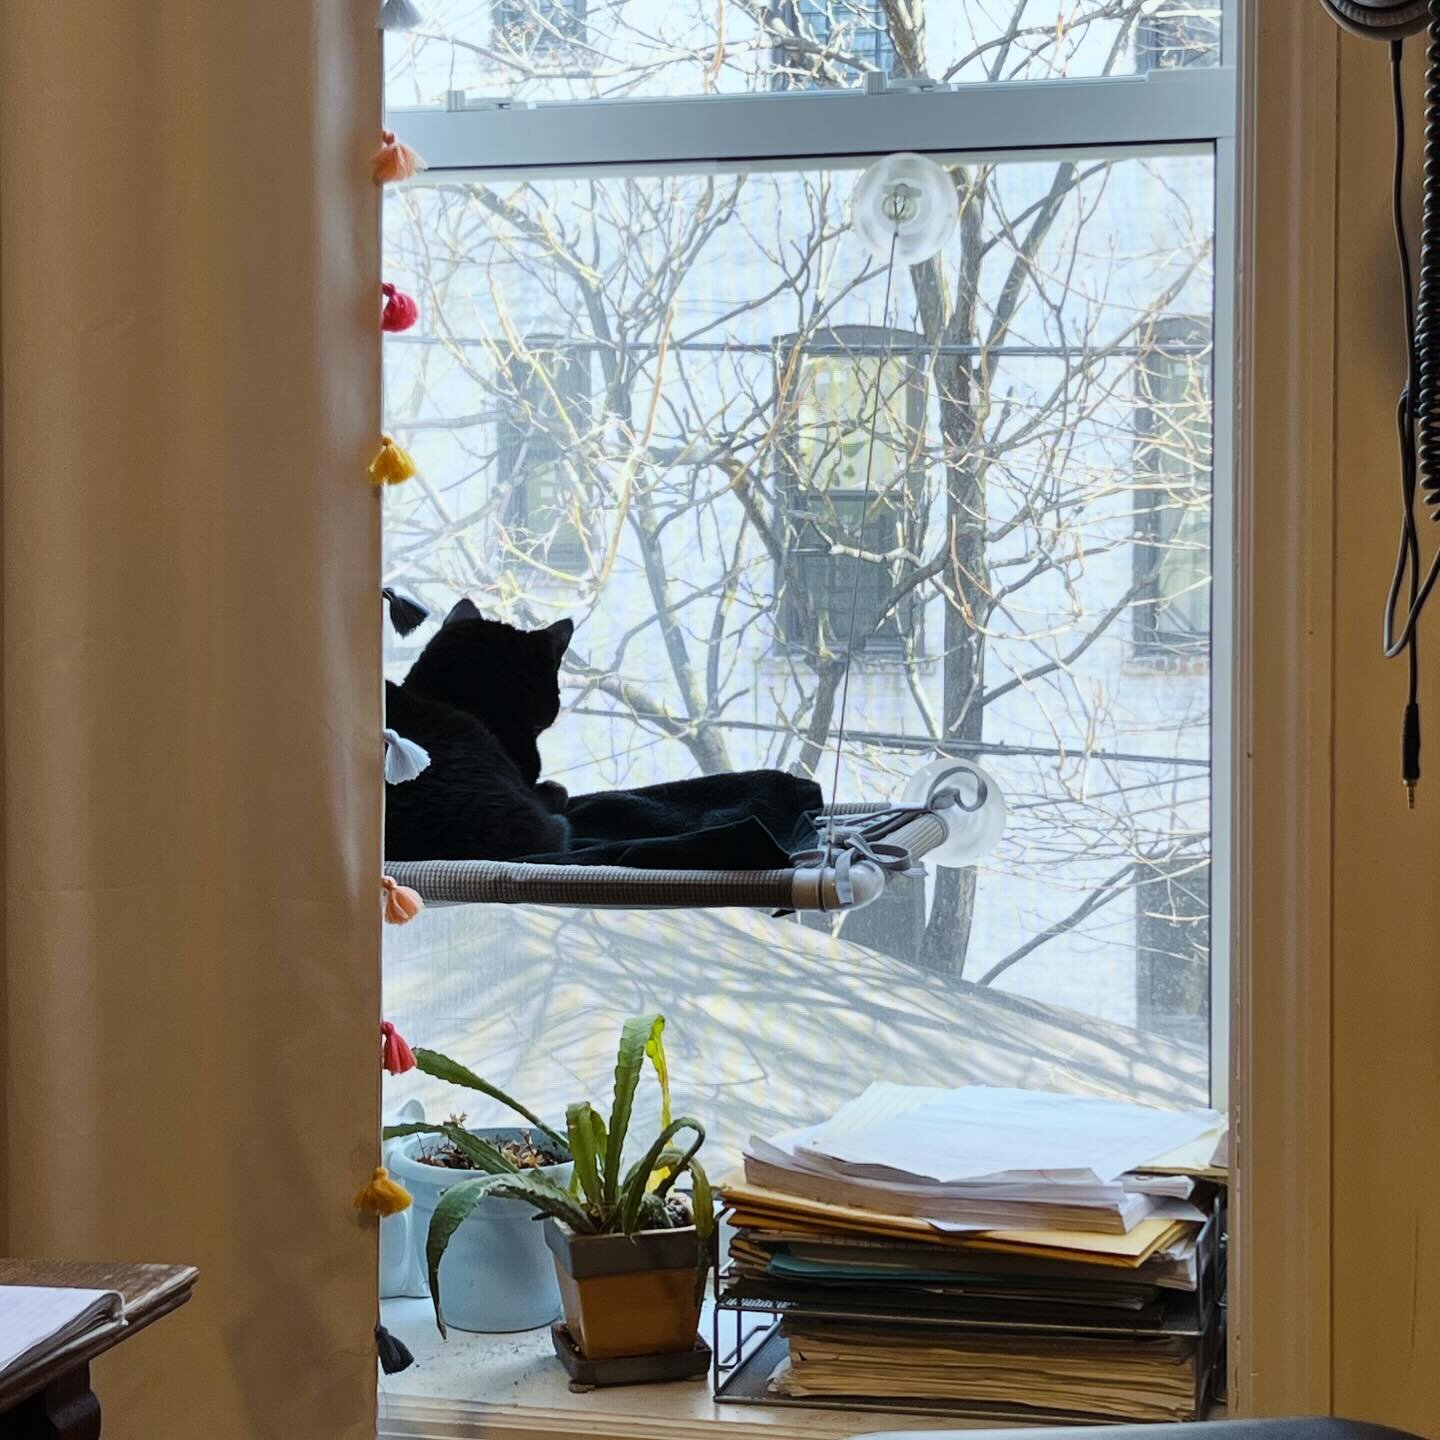 Exciting news here at EMB Editorial HQ: Chief Cat Officer Ruth Bader Ginspurr has a new perch! 🐈&zwj;⬛